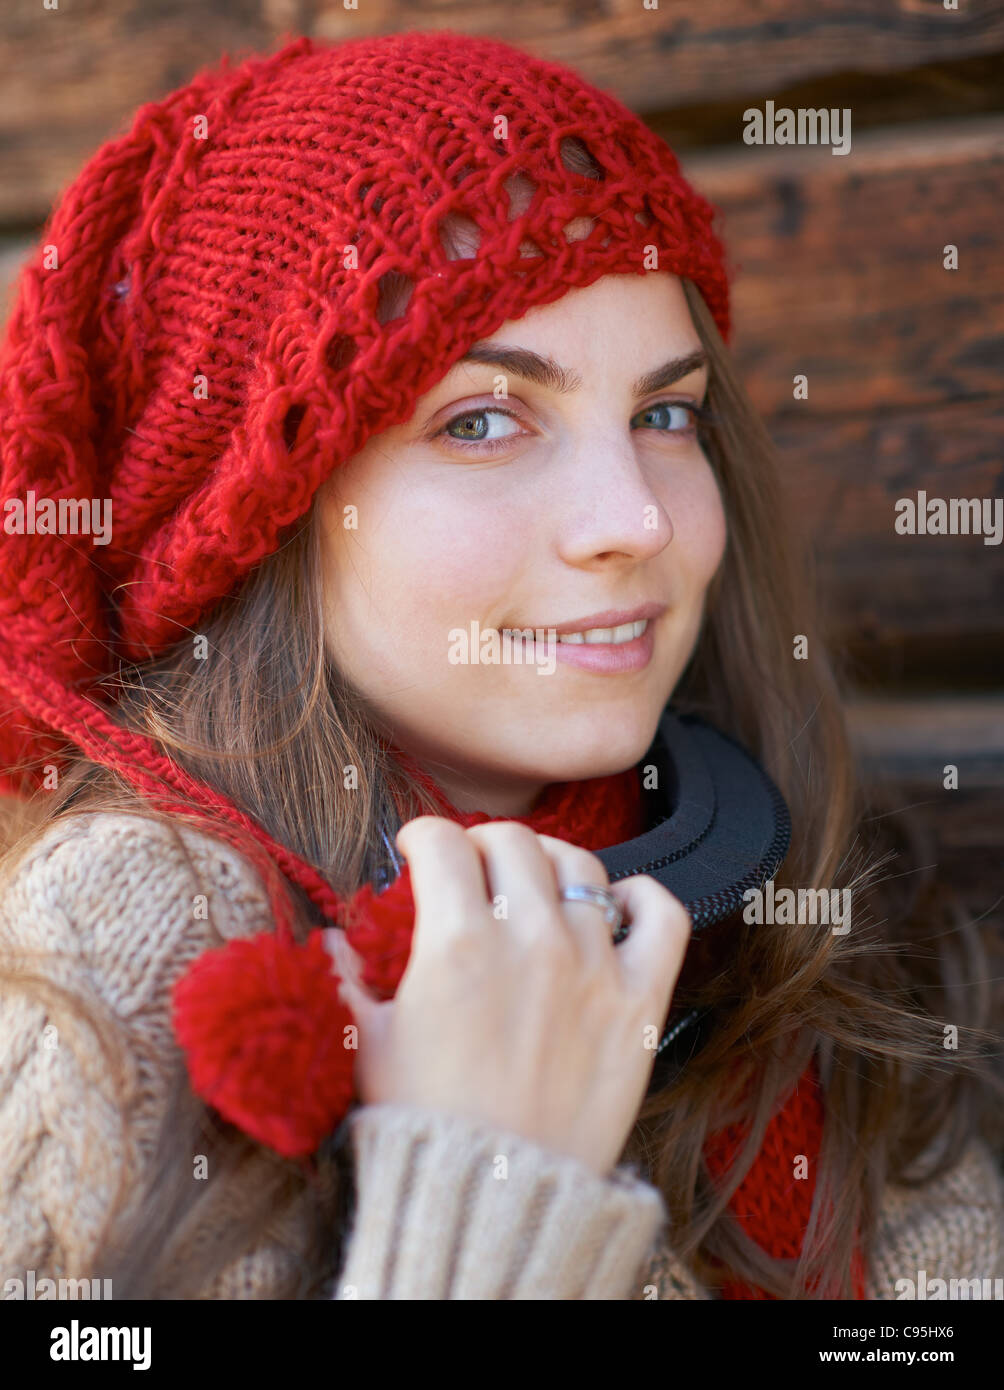 Portrait of a young girl wearing a red hat and sky glasses. Stock Photo